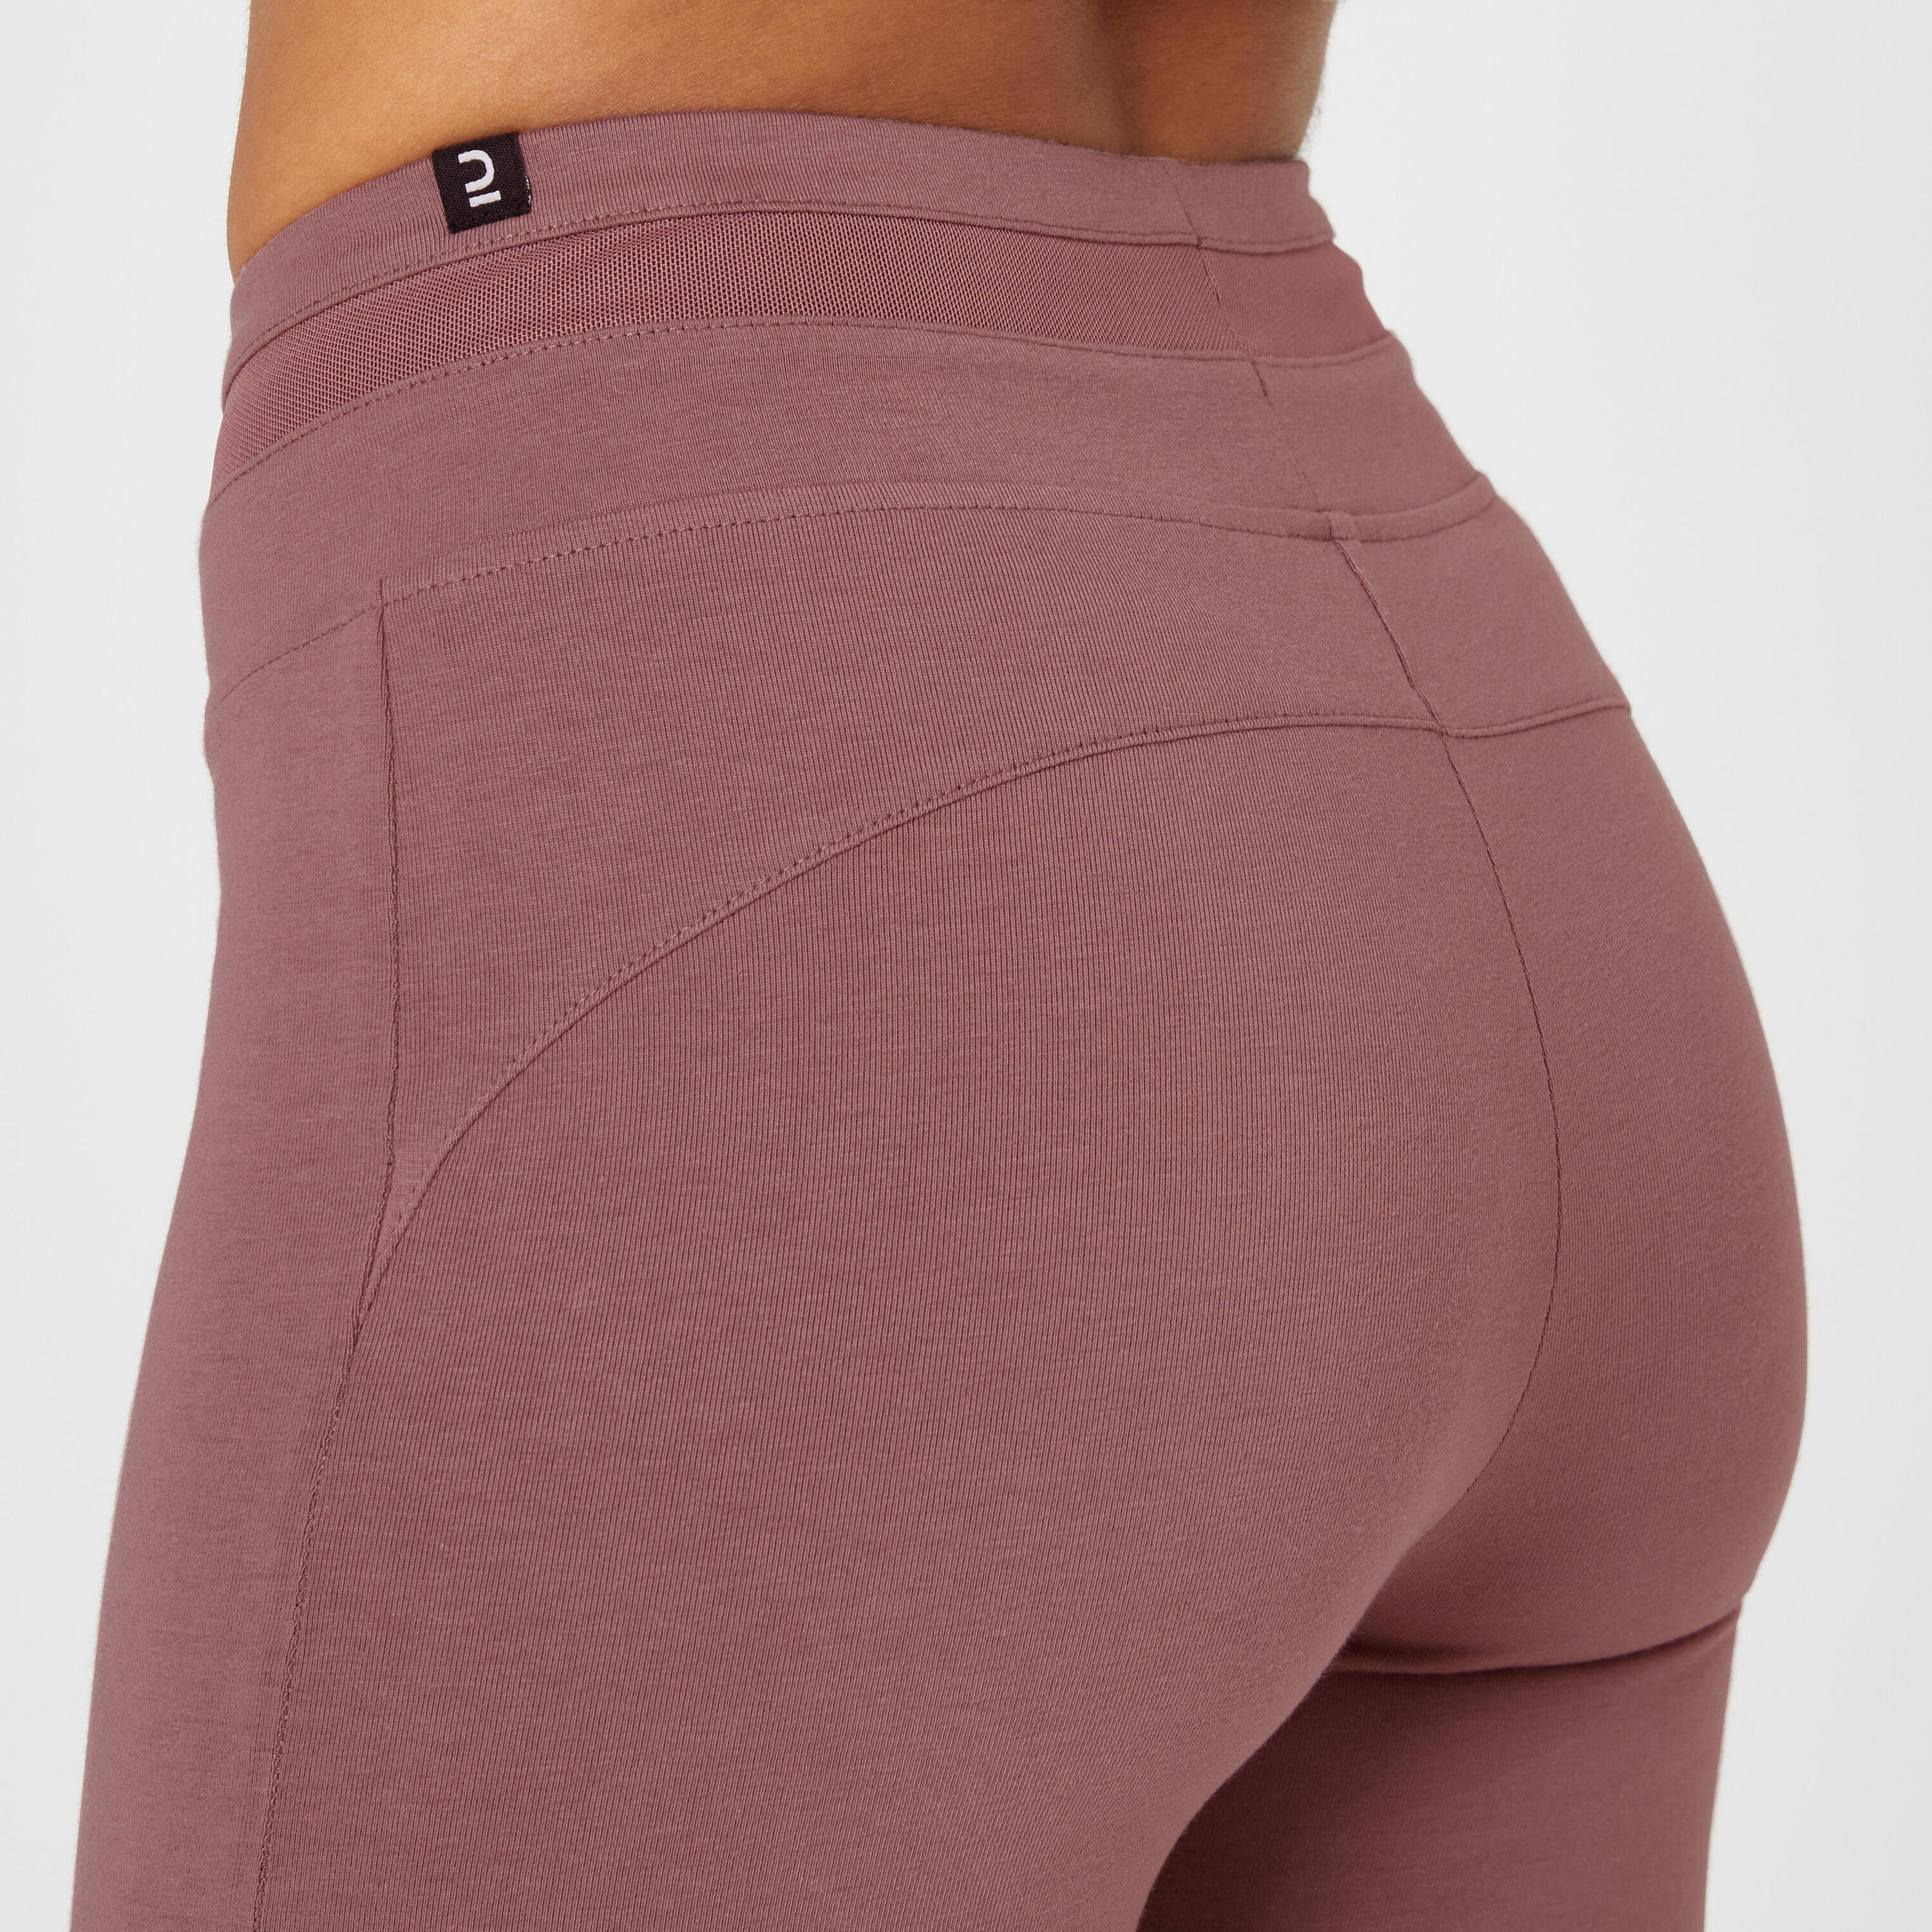 Stretchy High-Waisted Cotton Fitness Leggings with Mesh - Purple 6/7